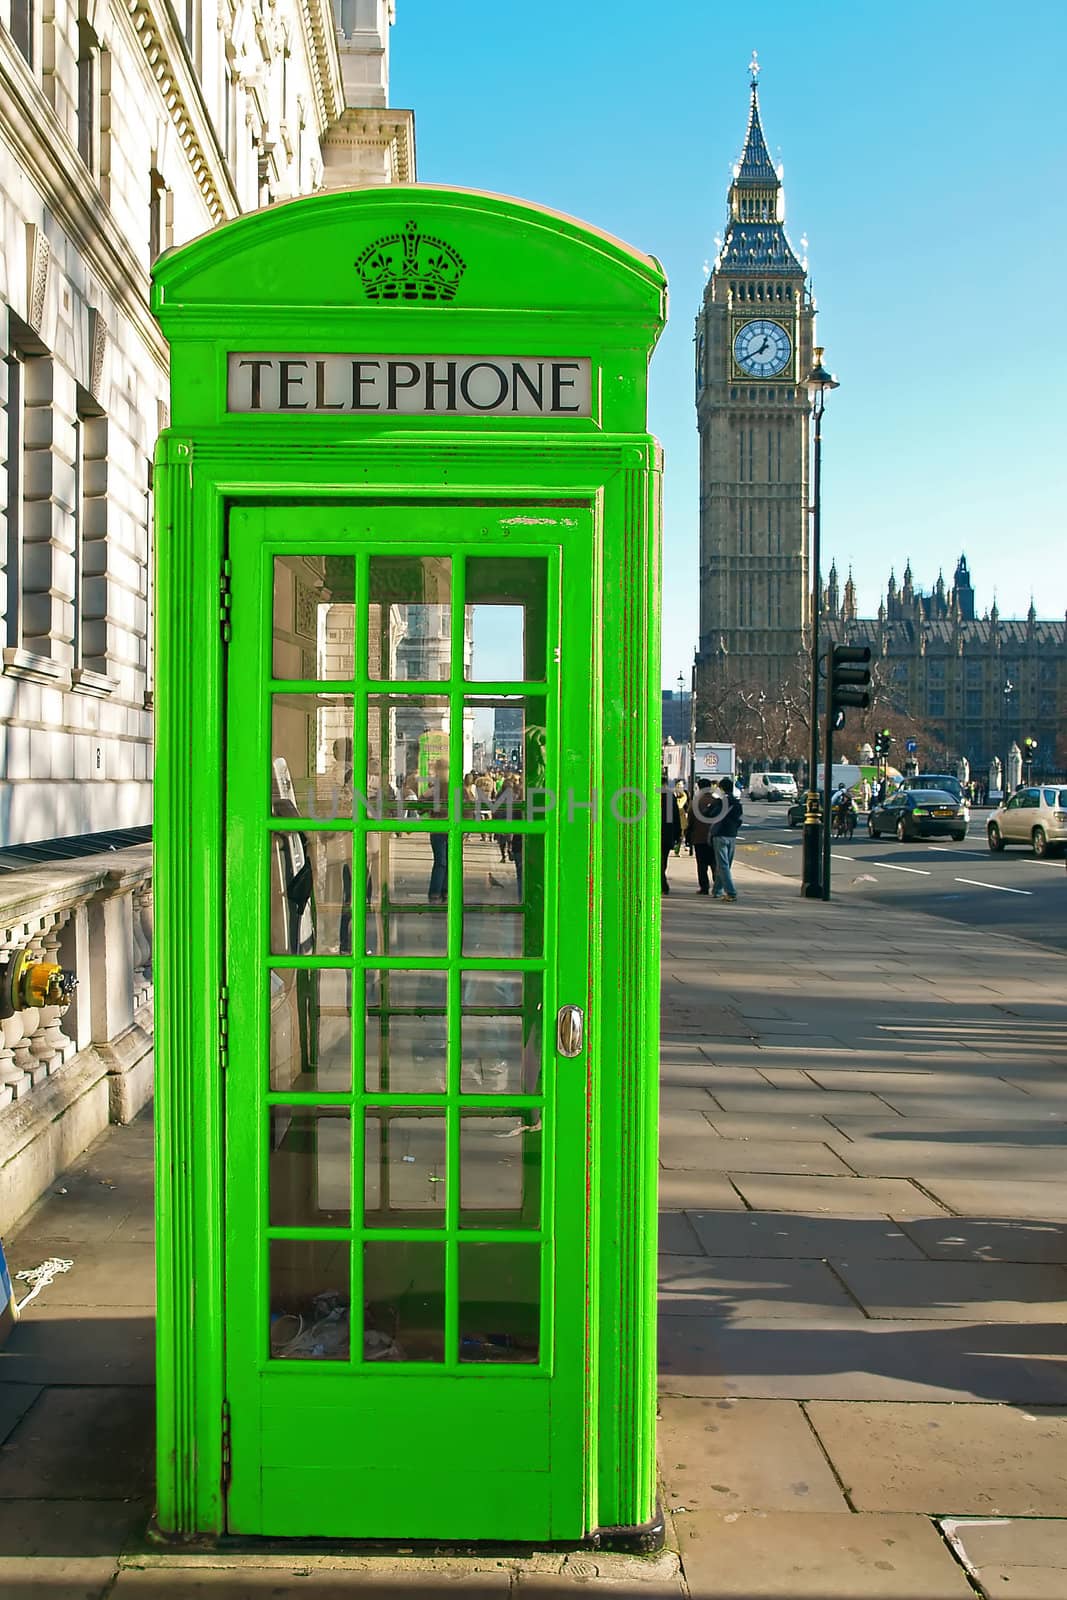 A green telephone booth London